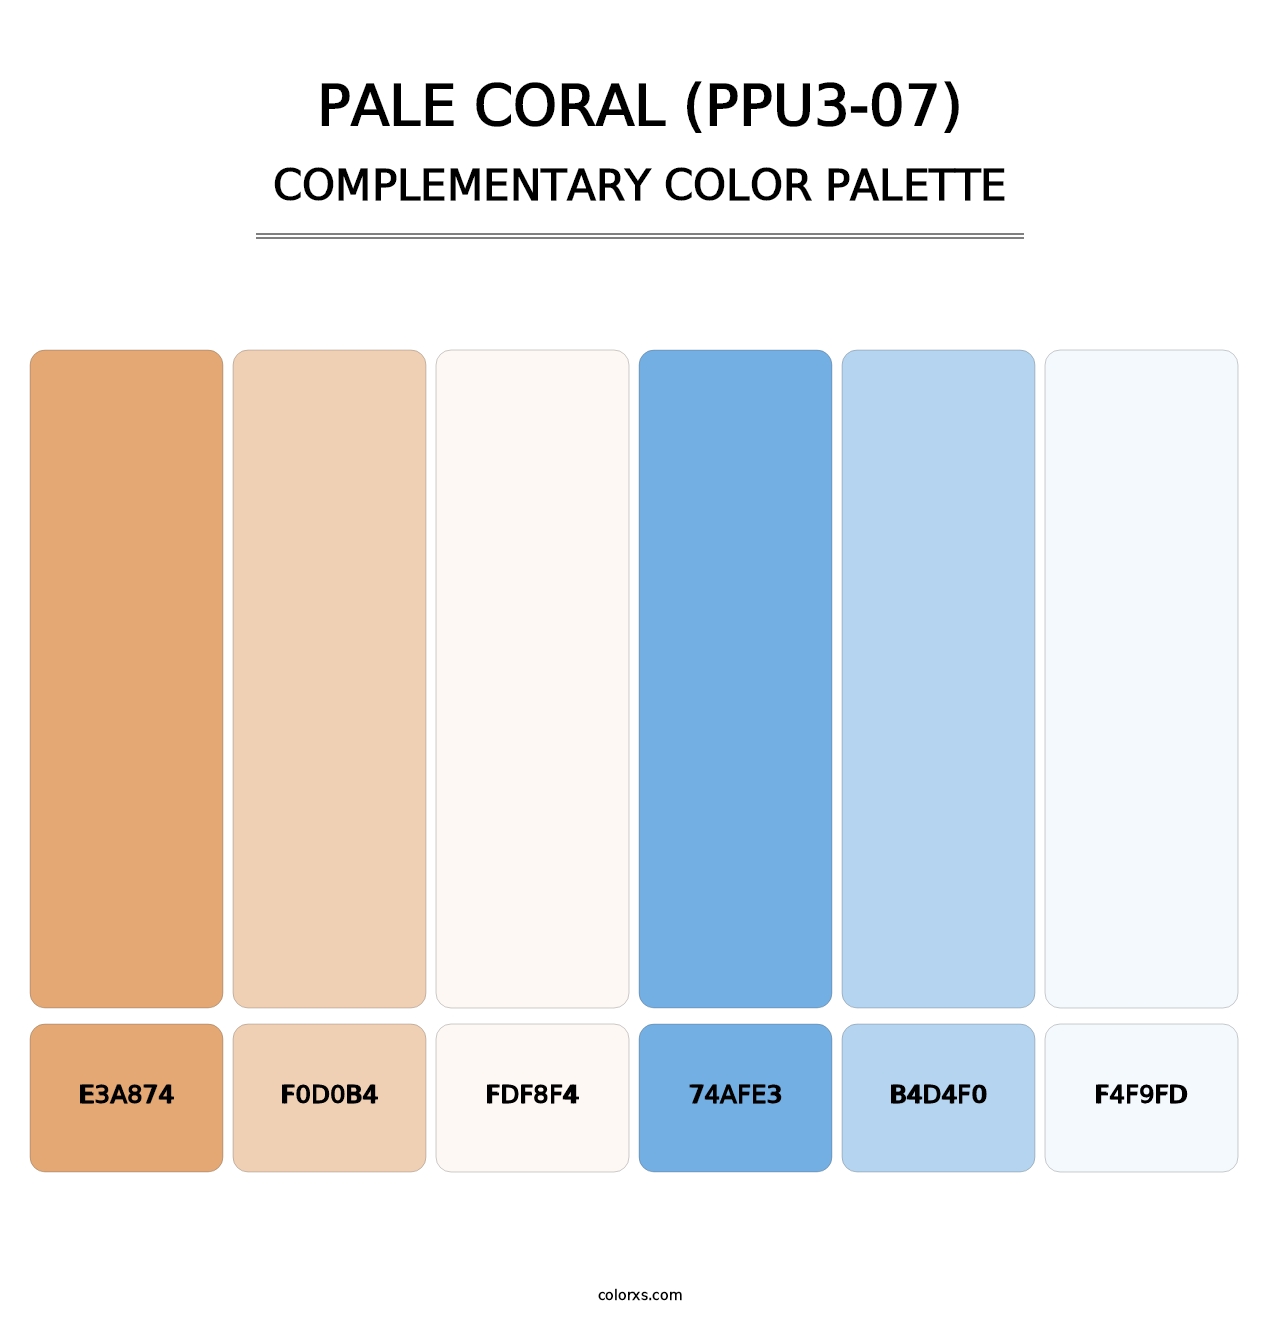 Pale Coral (PPU3-07) - Complementary Color Palette